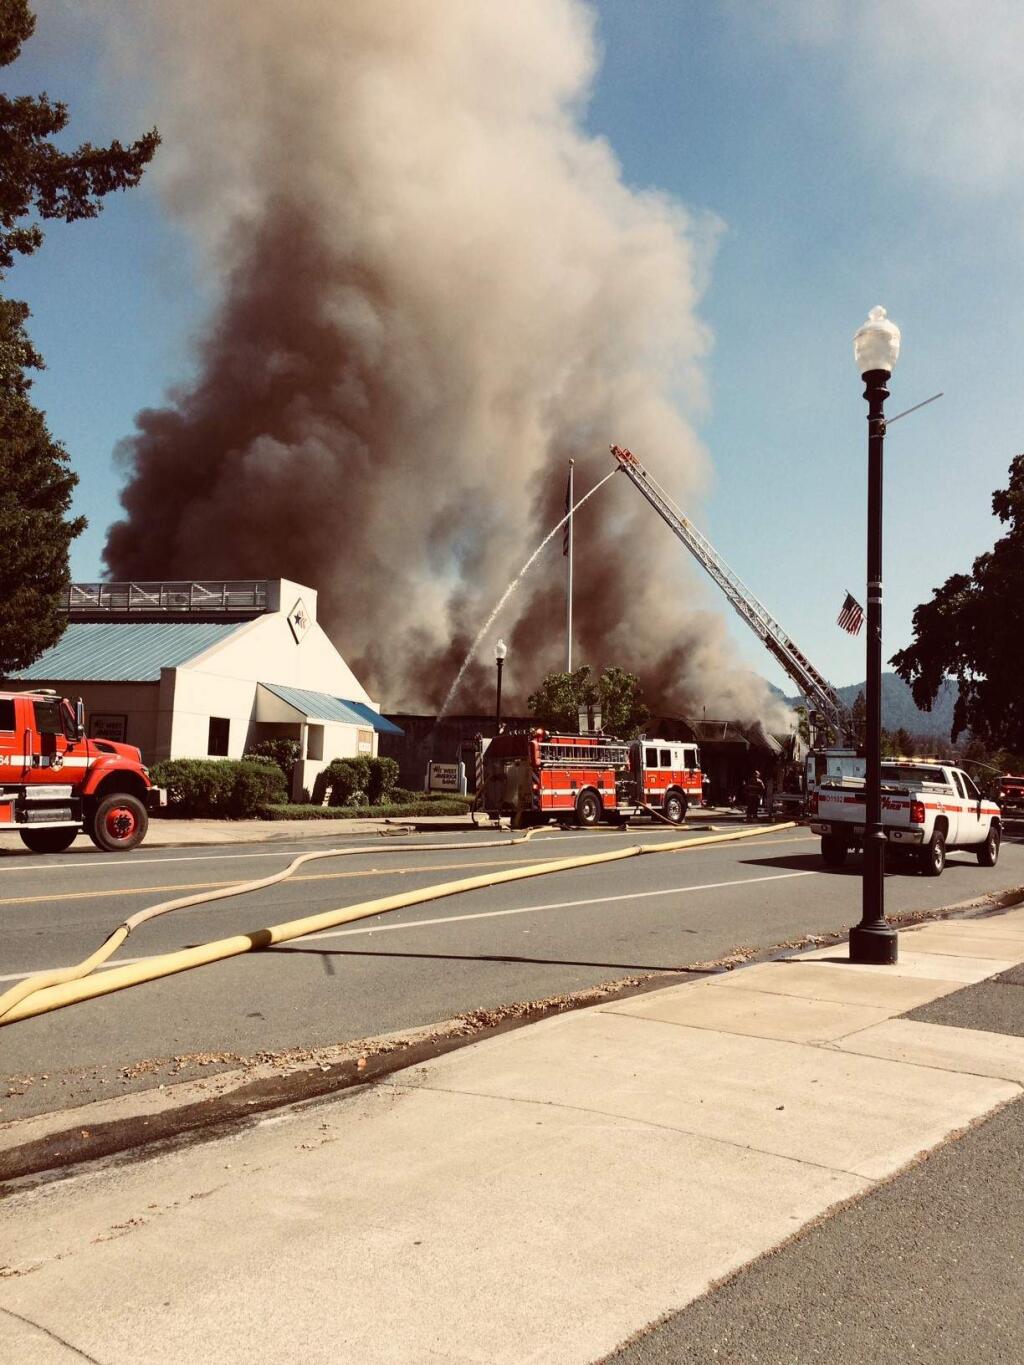 Fire burns Hardester's Market in Middletown on Monday, May 28, 2018. (COURTESY OF MARK PEDROIA)